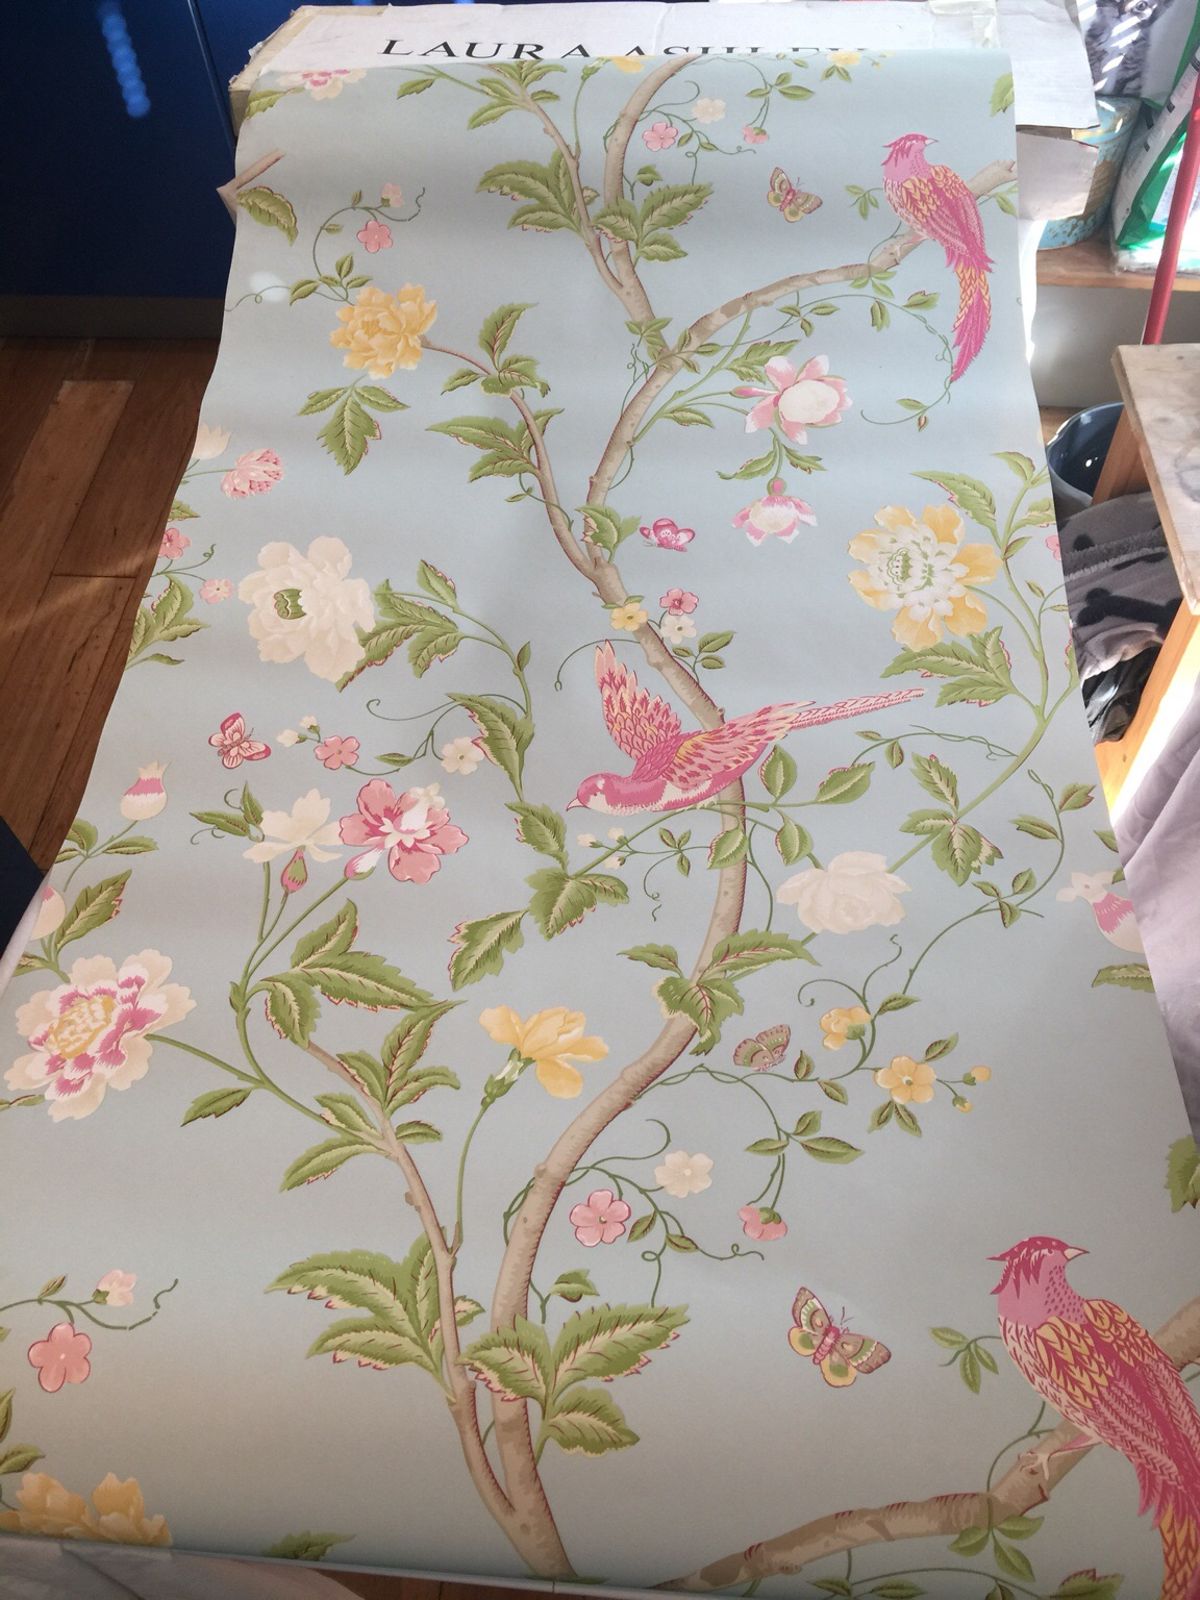 About 70% Left Of A Luxurious Roll Of Laura Ashley - Laura Ashley Summer Palace - HD Wallpaper 